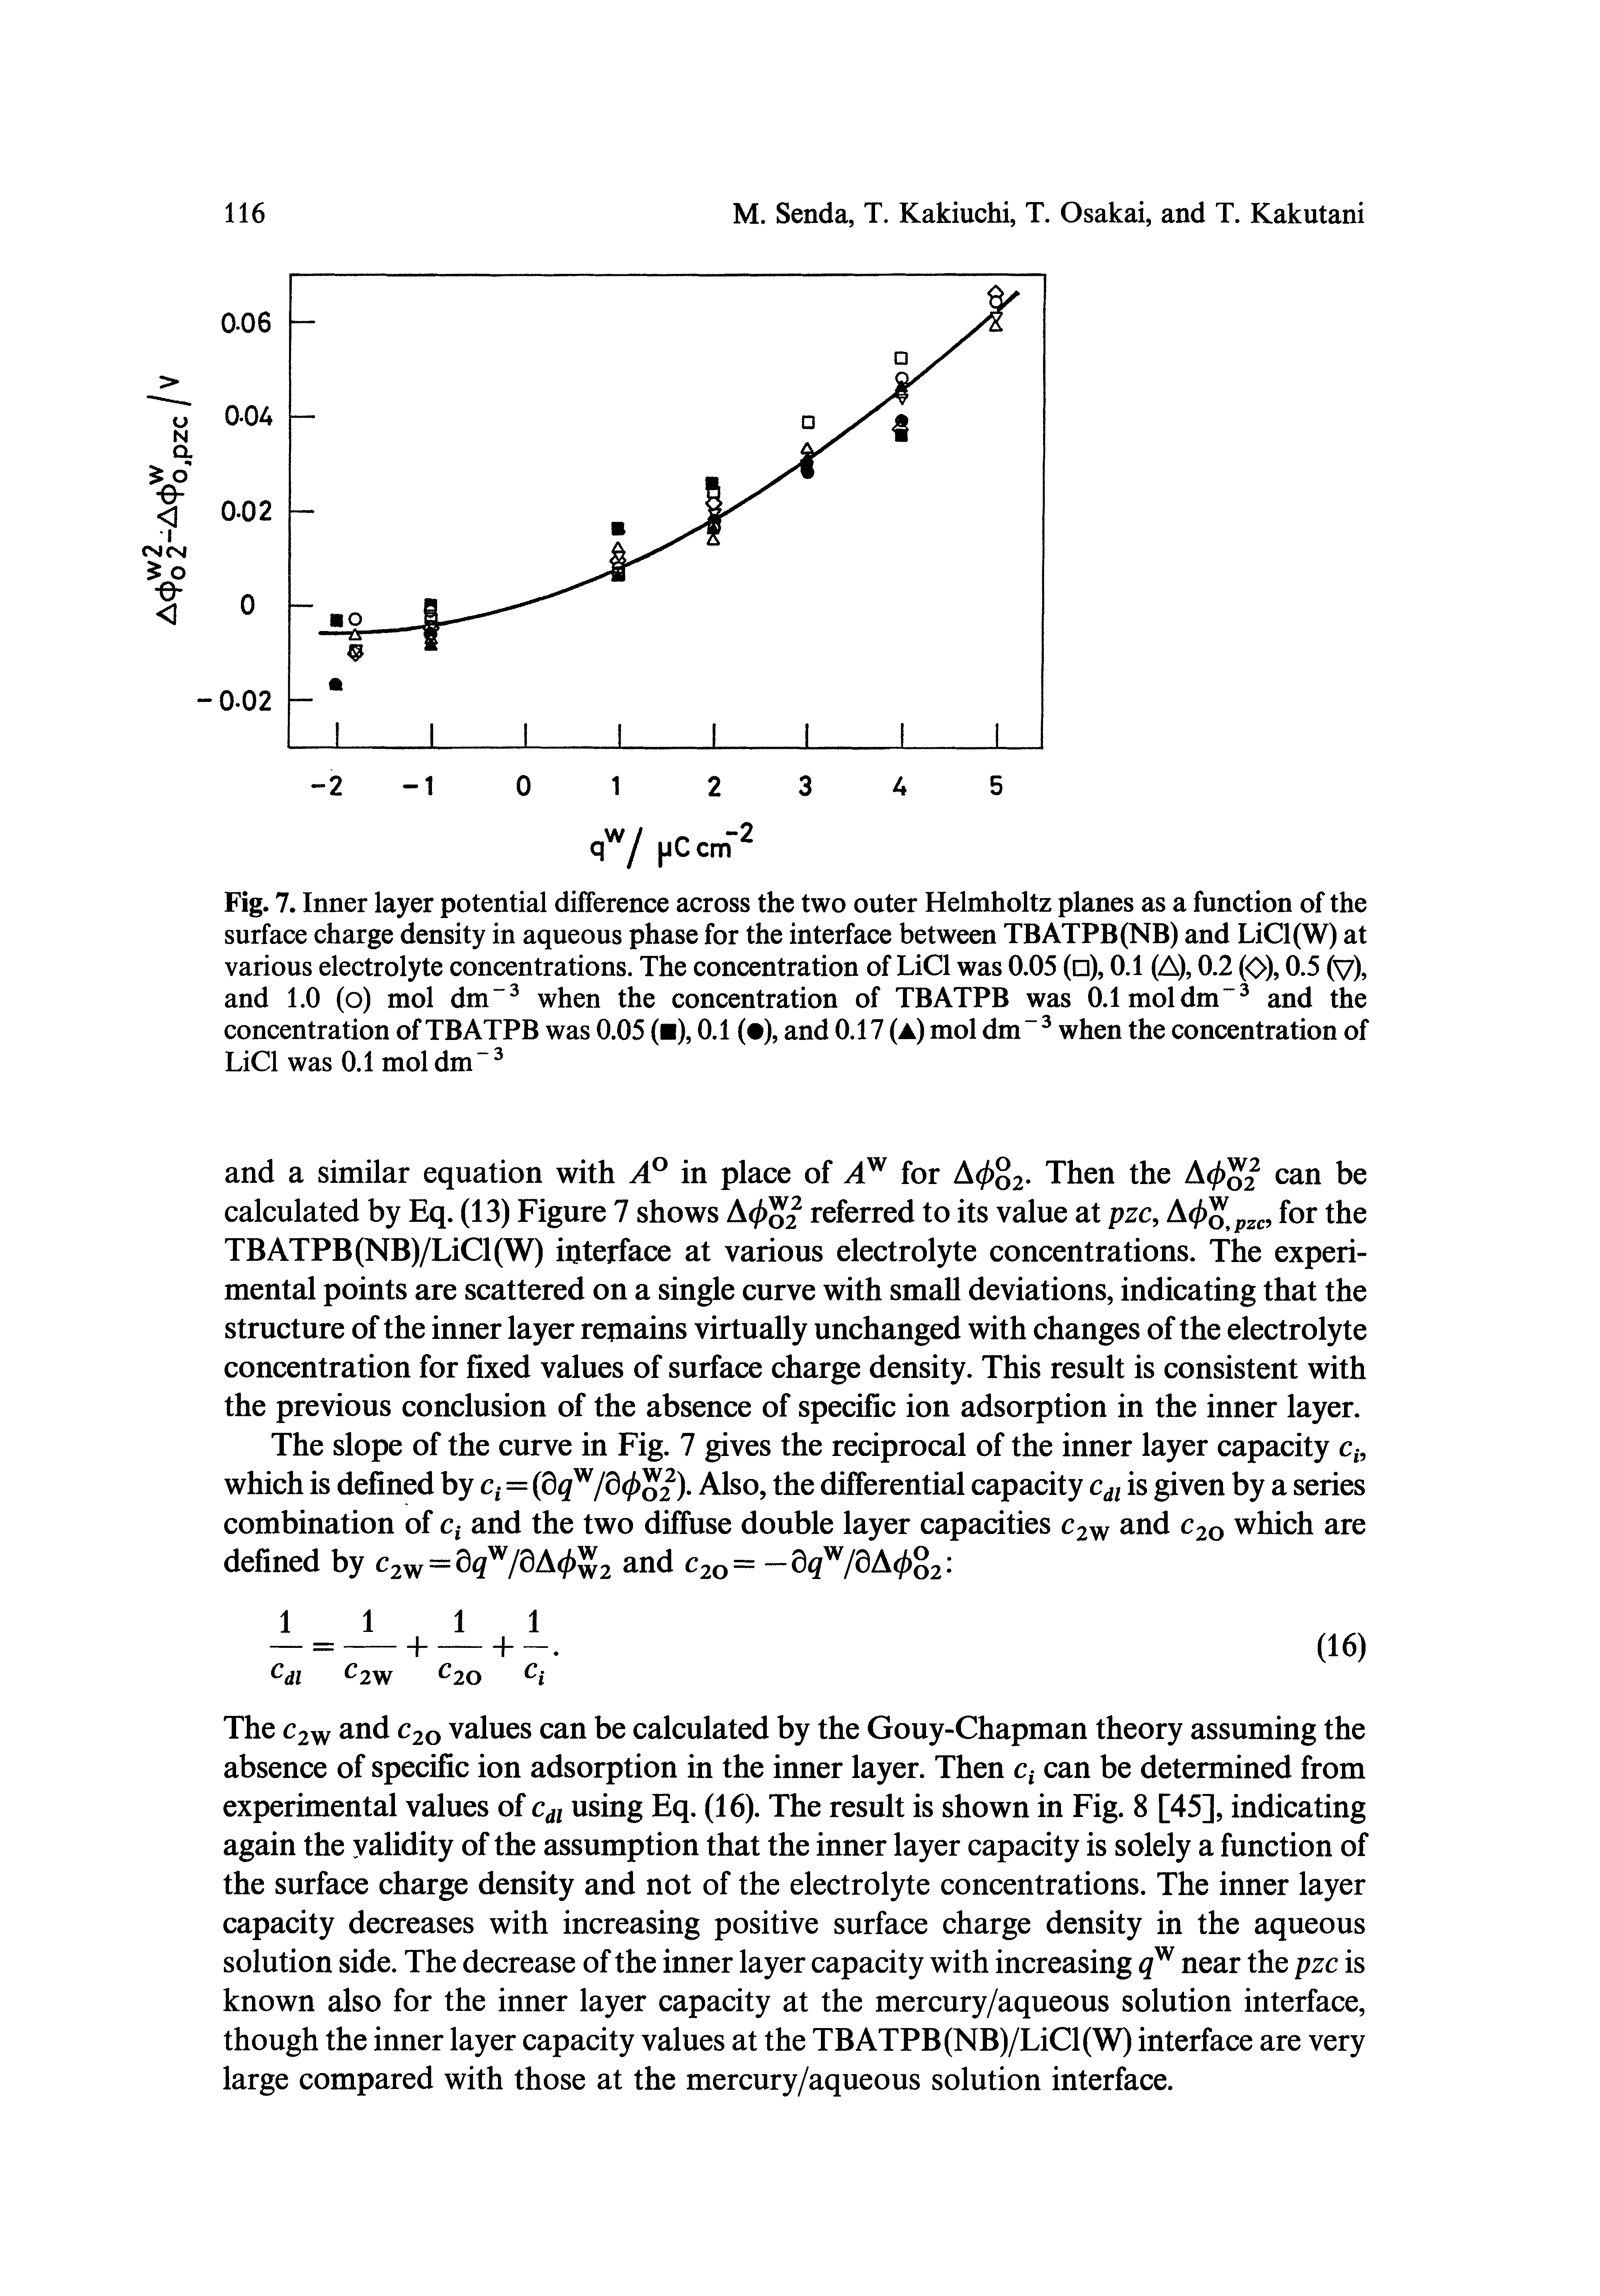 Fig. 7. Inner layer potential difference across the two outer Helmholtz planes as a function of the surface charge density in aqueous phase for the interface between TBATPB(NB) and LiCl(W) at various electrolyte concentrations. The concentration of LiCl was 0.05 ( ), 0.1 (A), 0.2 (O), 0.5 (v), and 1.0 (o) mol dm" when the concentration of TBATPB was 0.1 mol dm and the concentration of TBATPB was 0.05 ( ), 0.1 ( ), and 0.17 (a) mol dm" when the concentration of LiCl was 0.1 mol dm ...